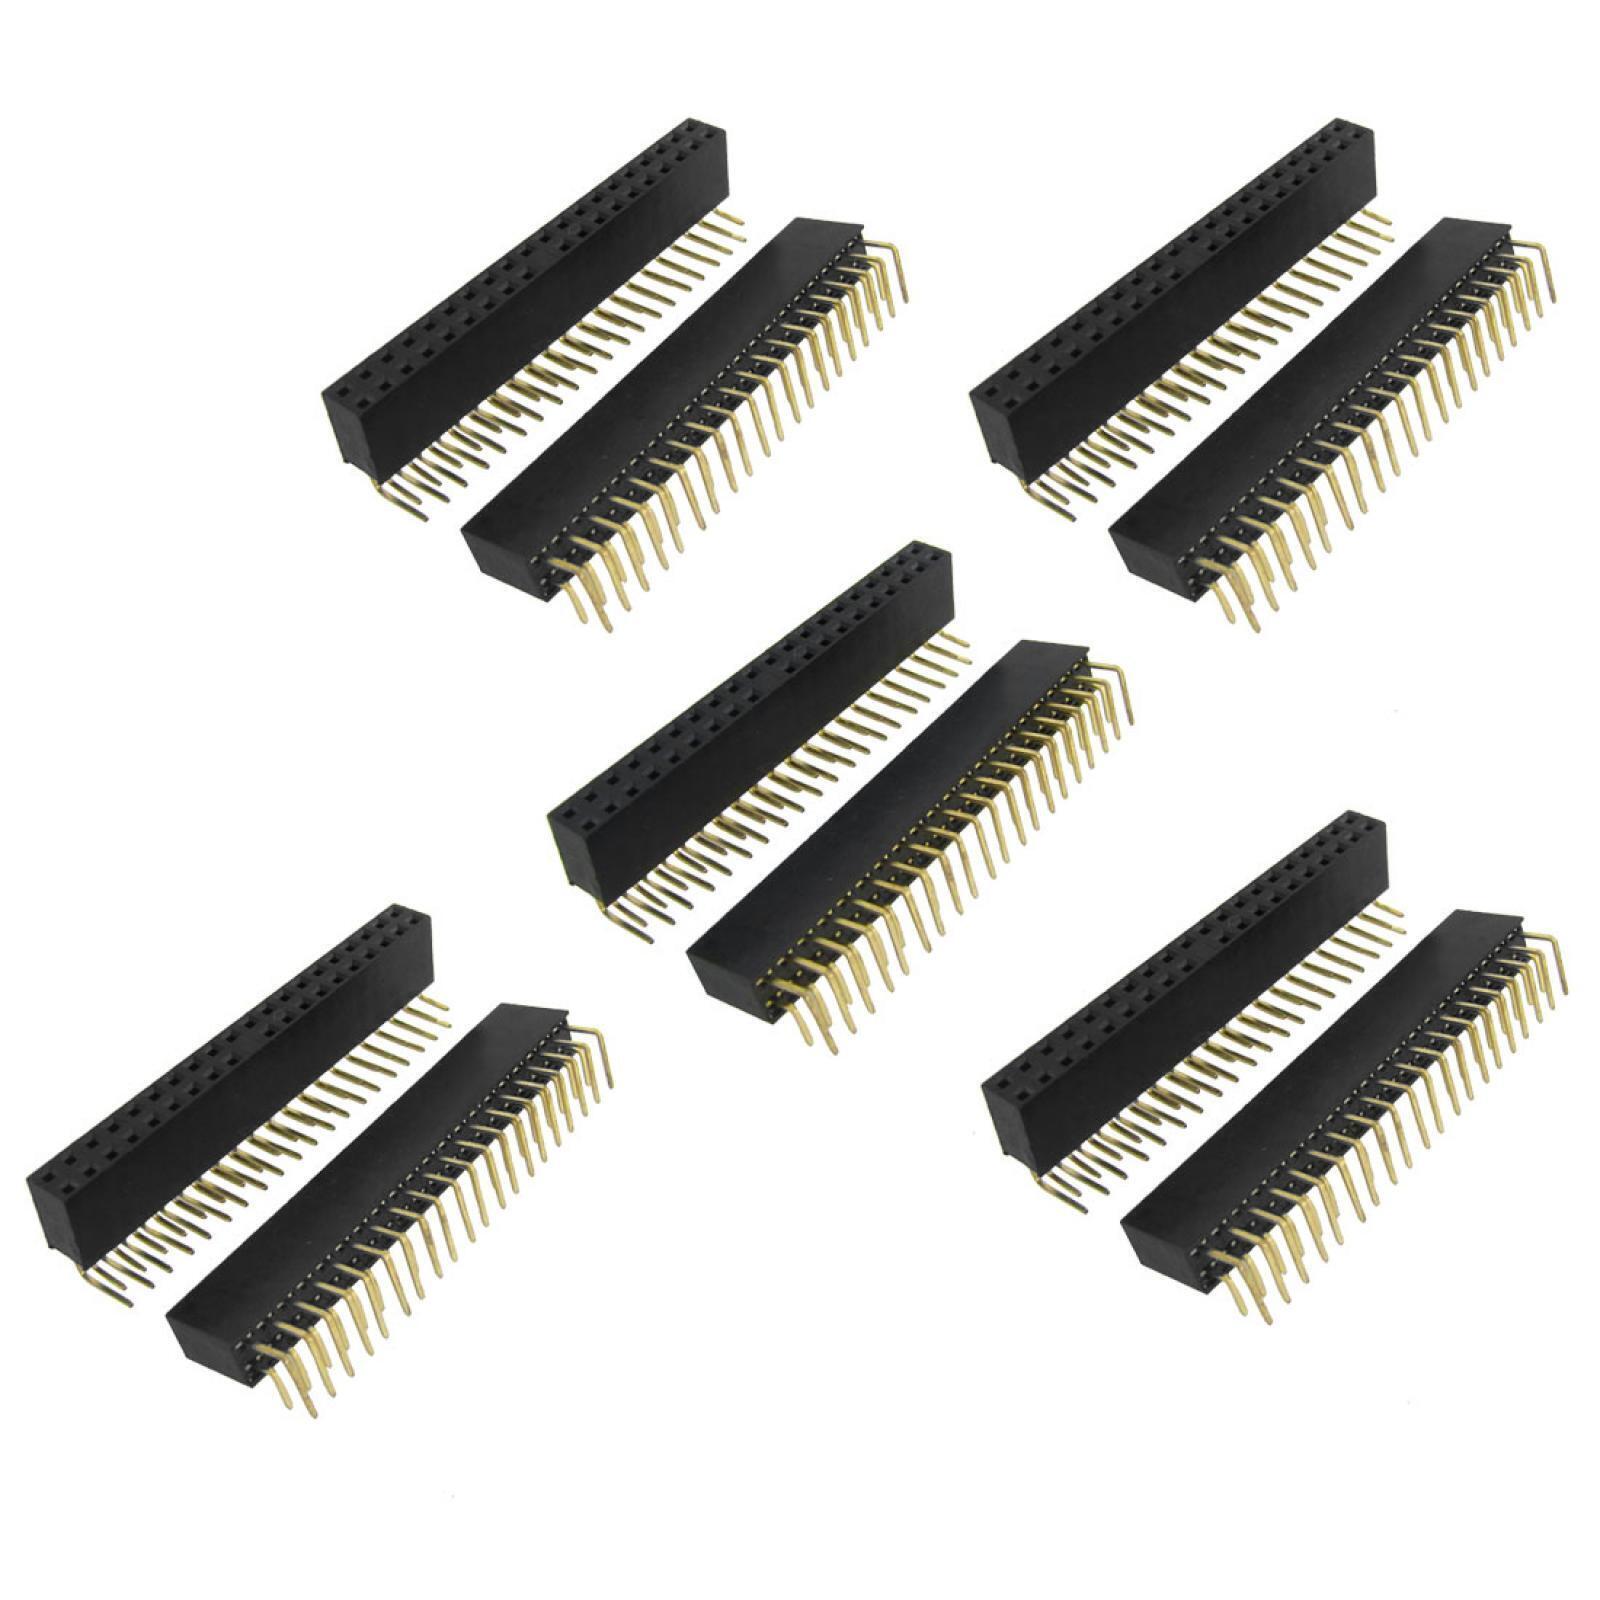 10pcs 2x20 Pin 2.54mm Pitch Dual Row Right Angle Female Pin Headers